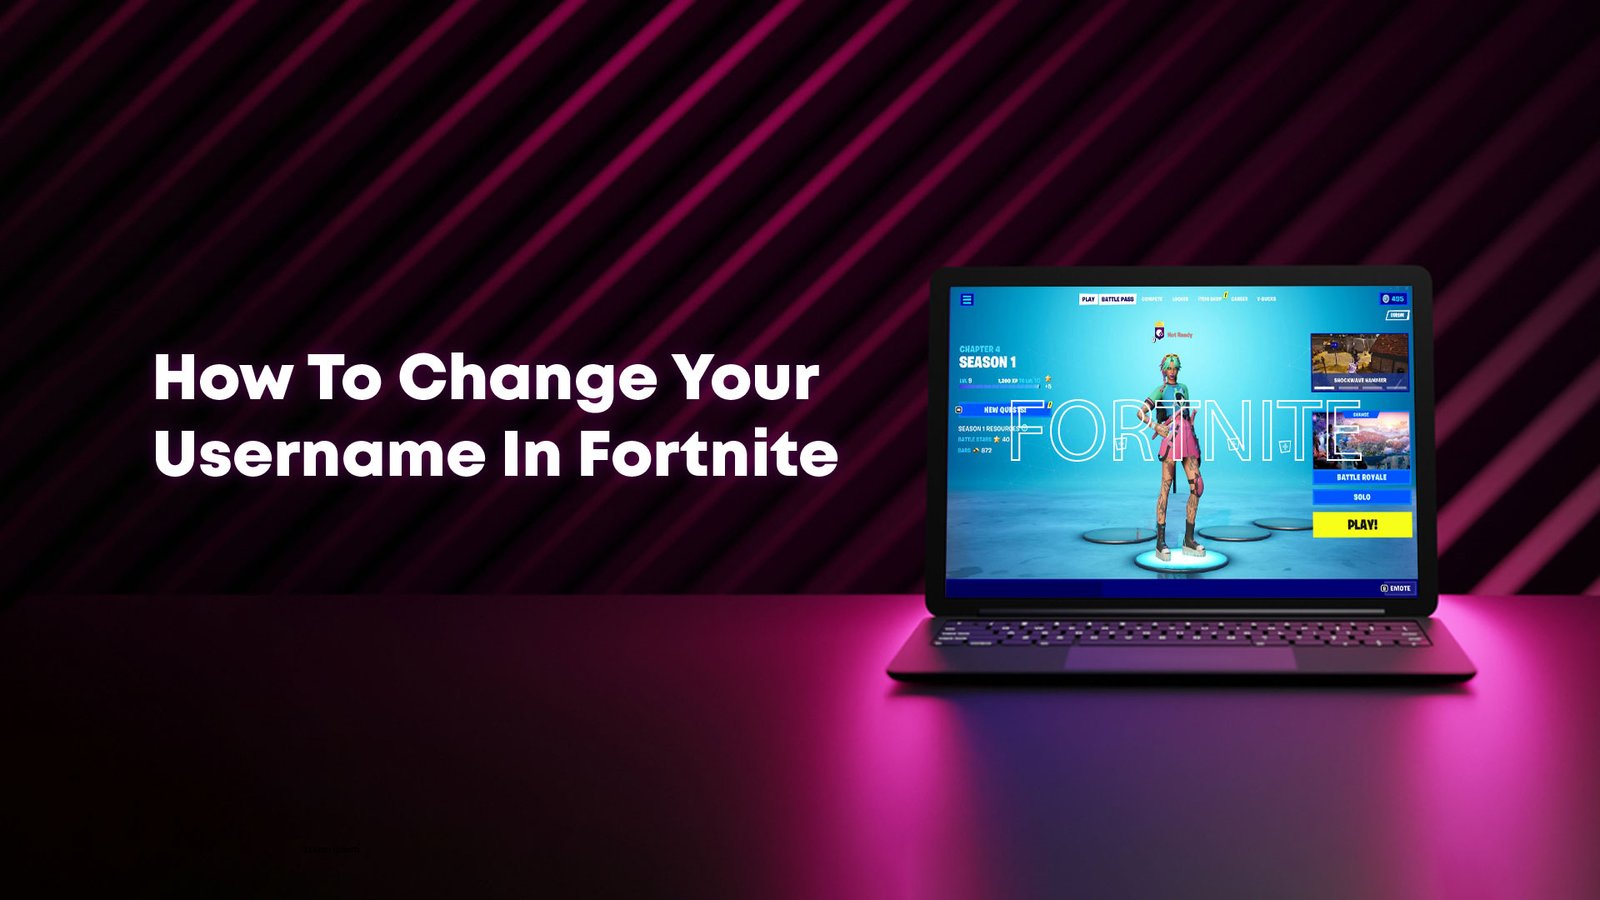 How to Change Your Username on Fortnite